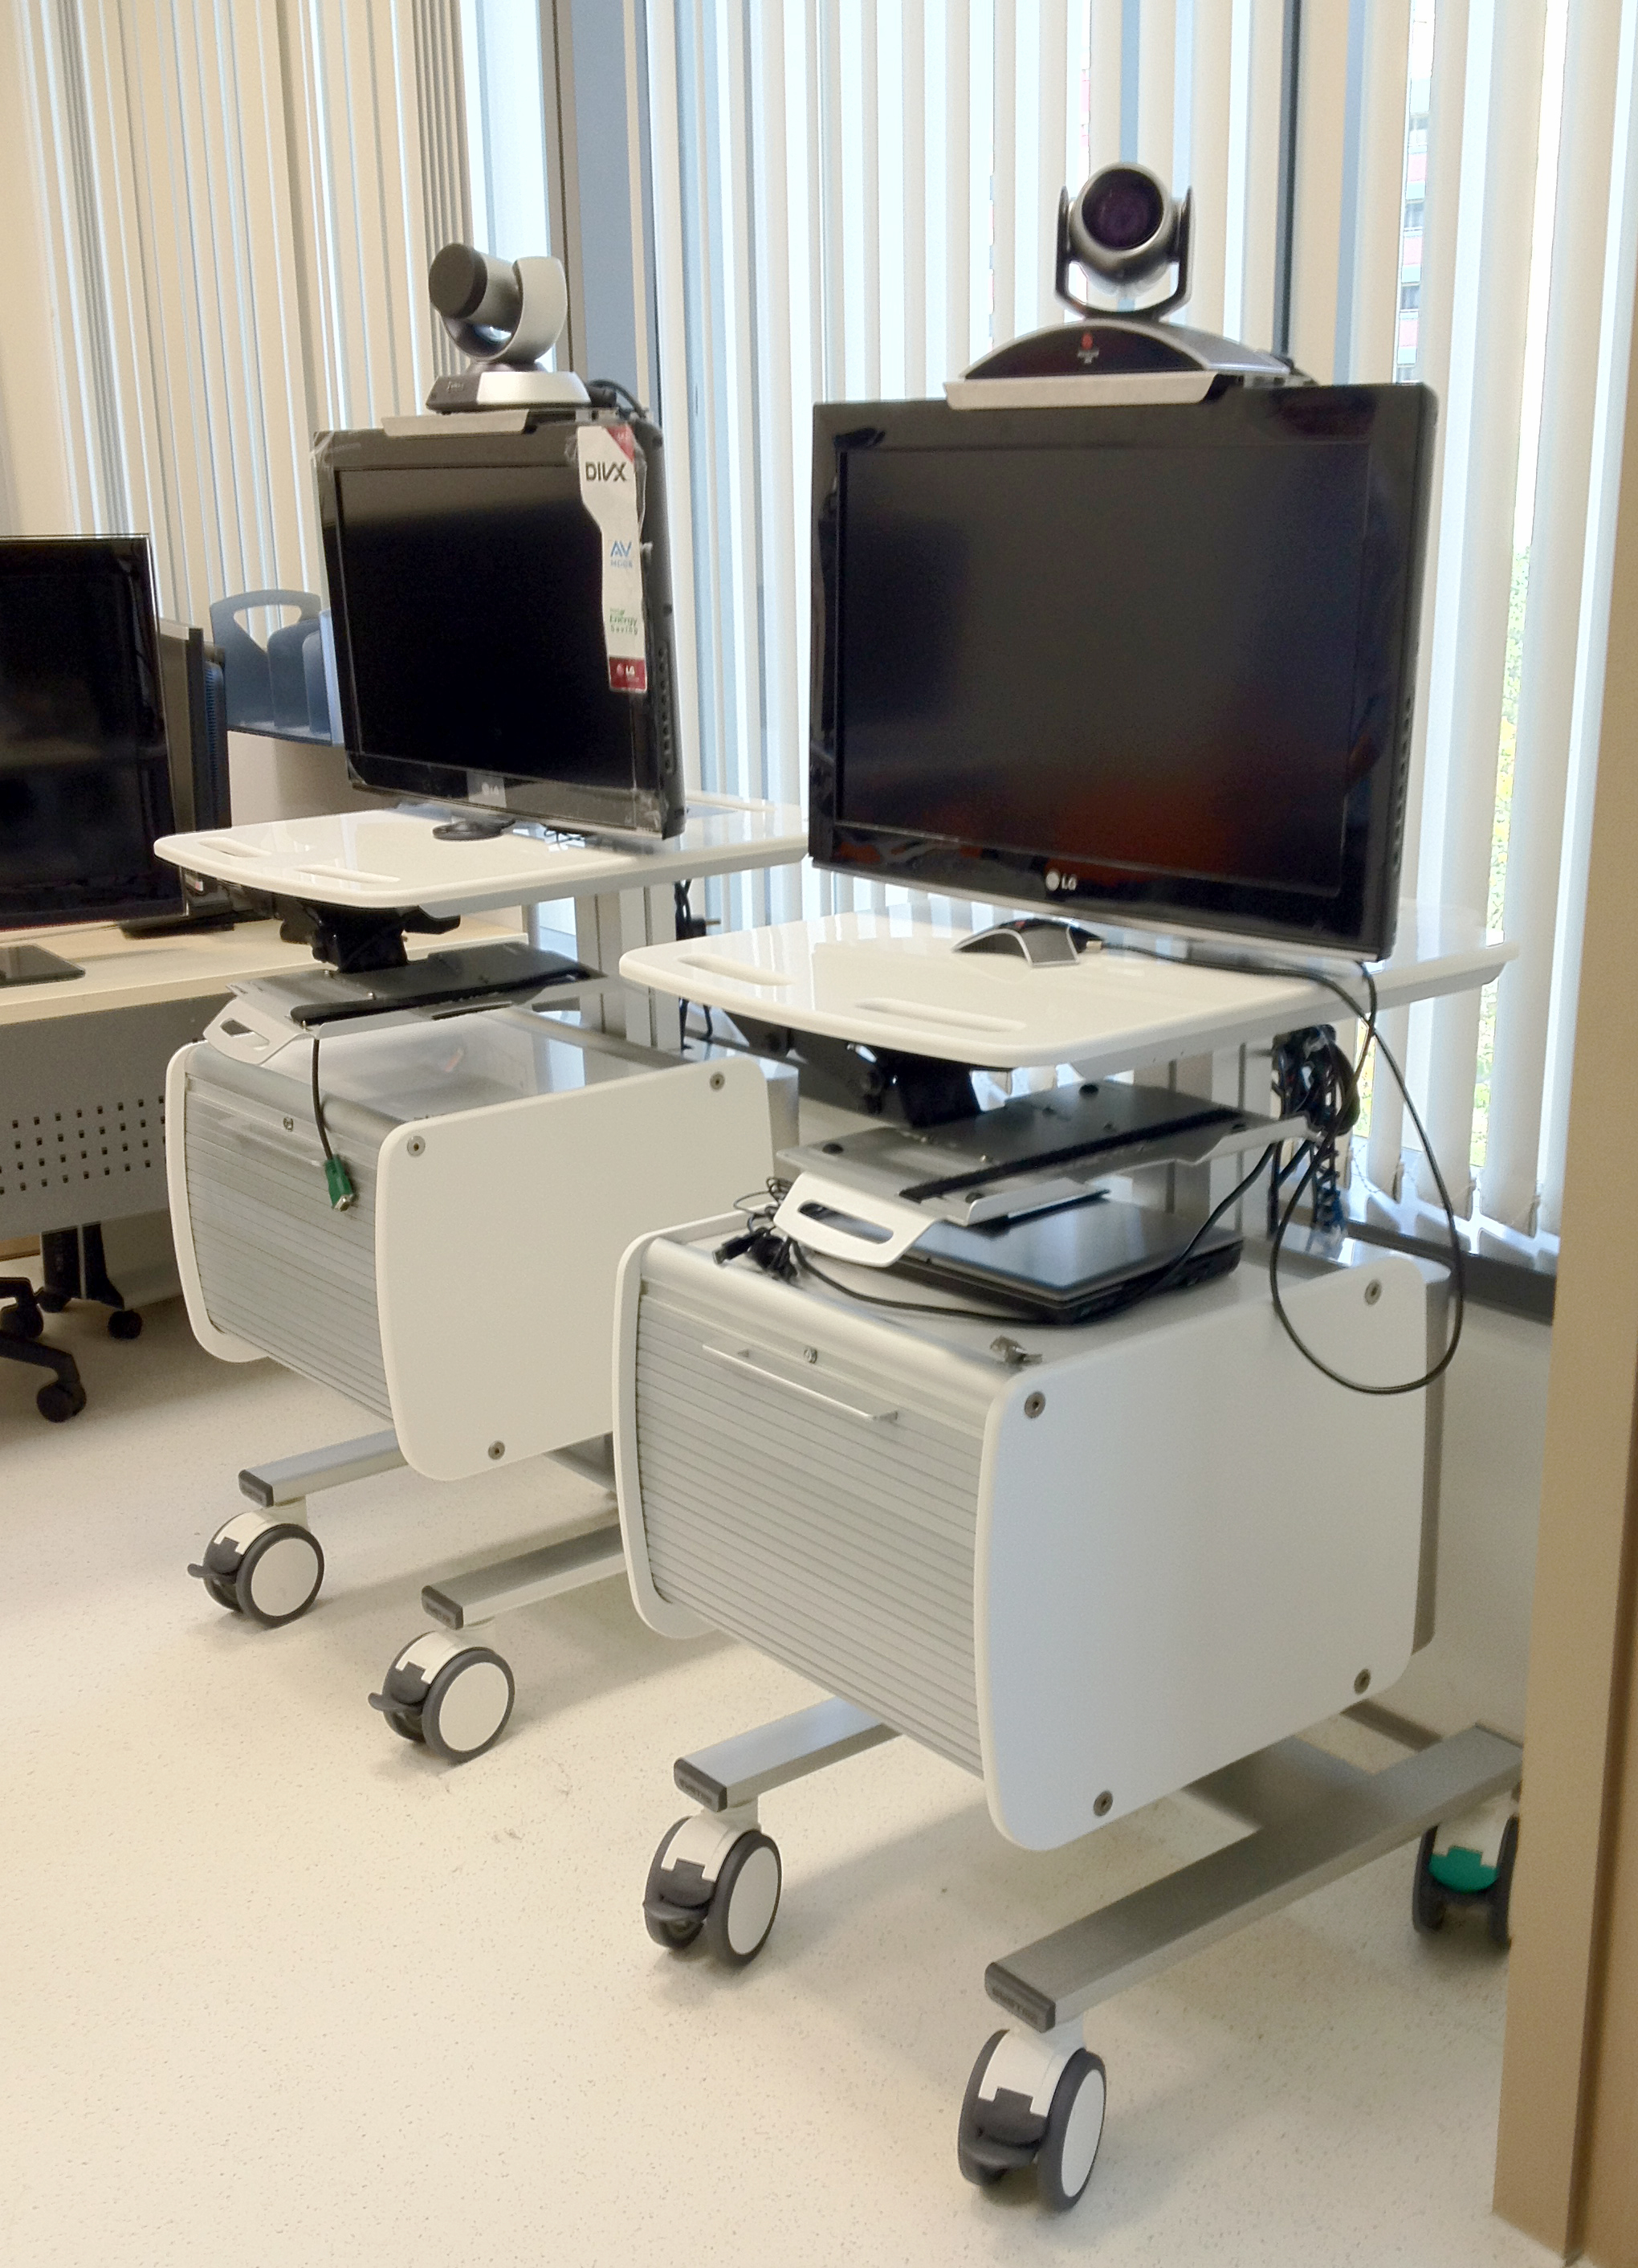 Powered workstation specific to telemedicine related operations ergotron, sv40, sv41, sv42, sv-40, sv-41, sv-42, humanscale, cow, wow, bmw